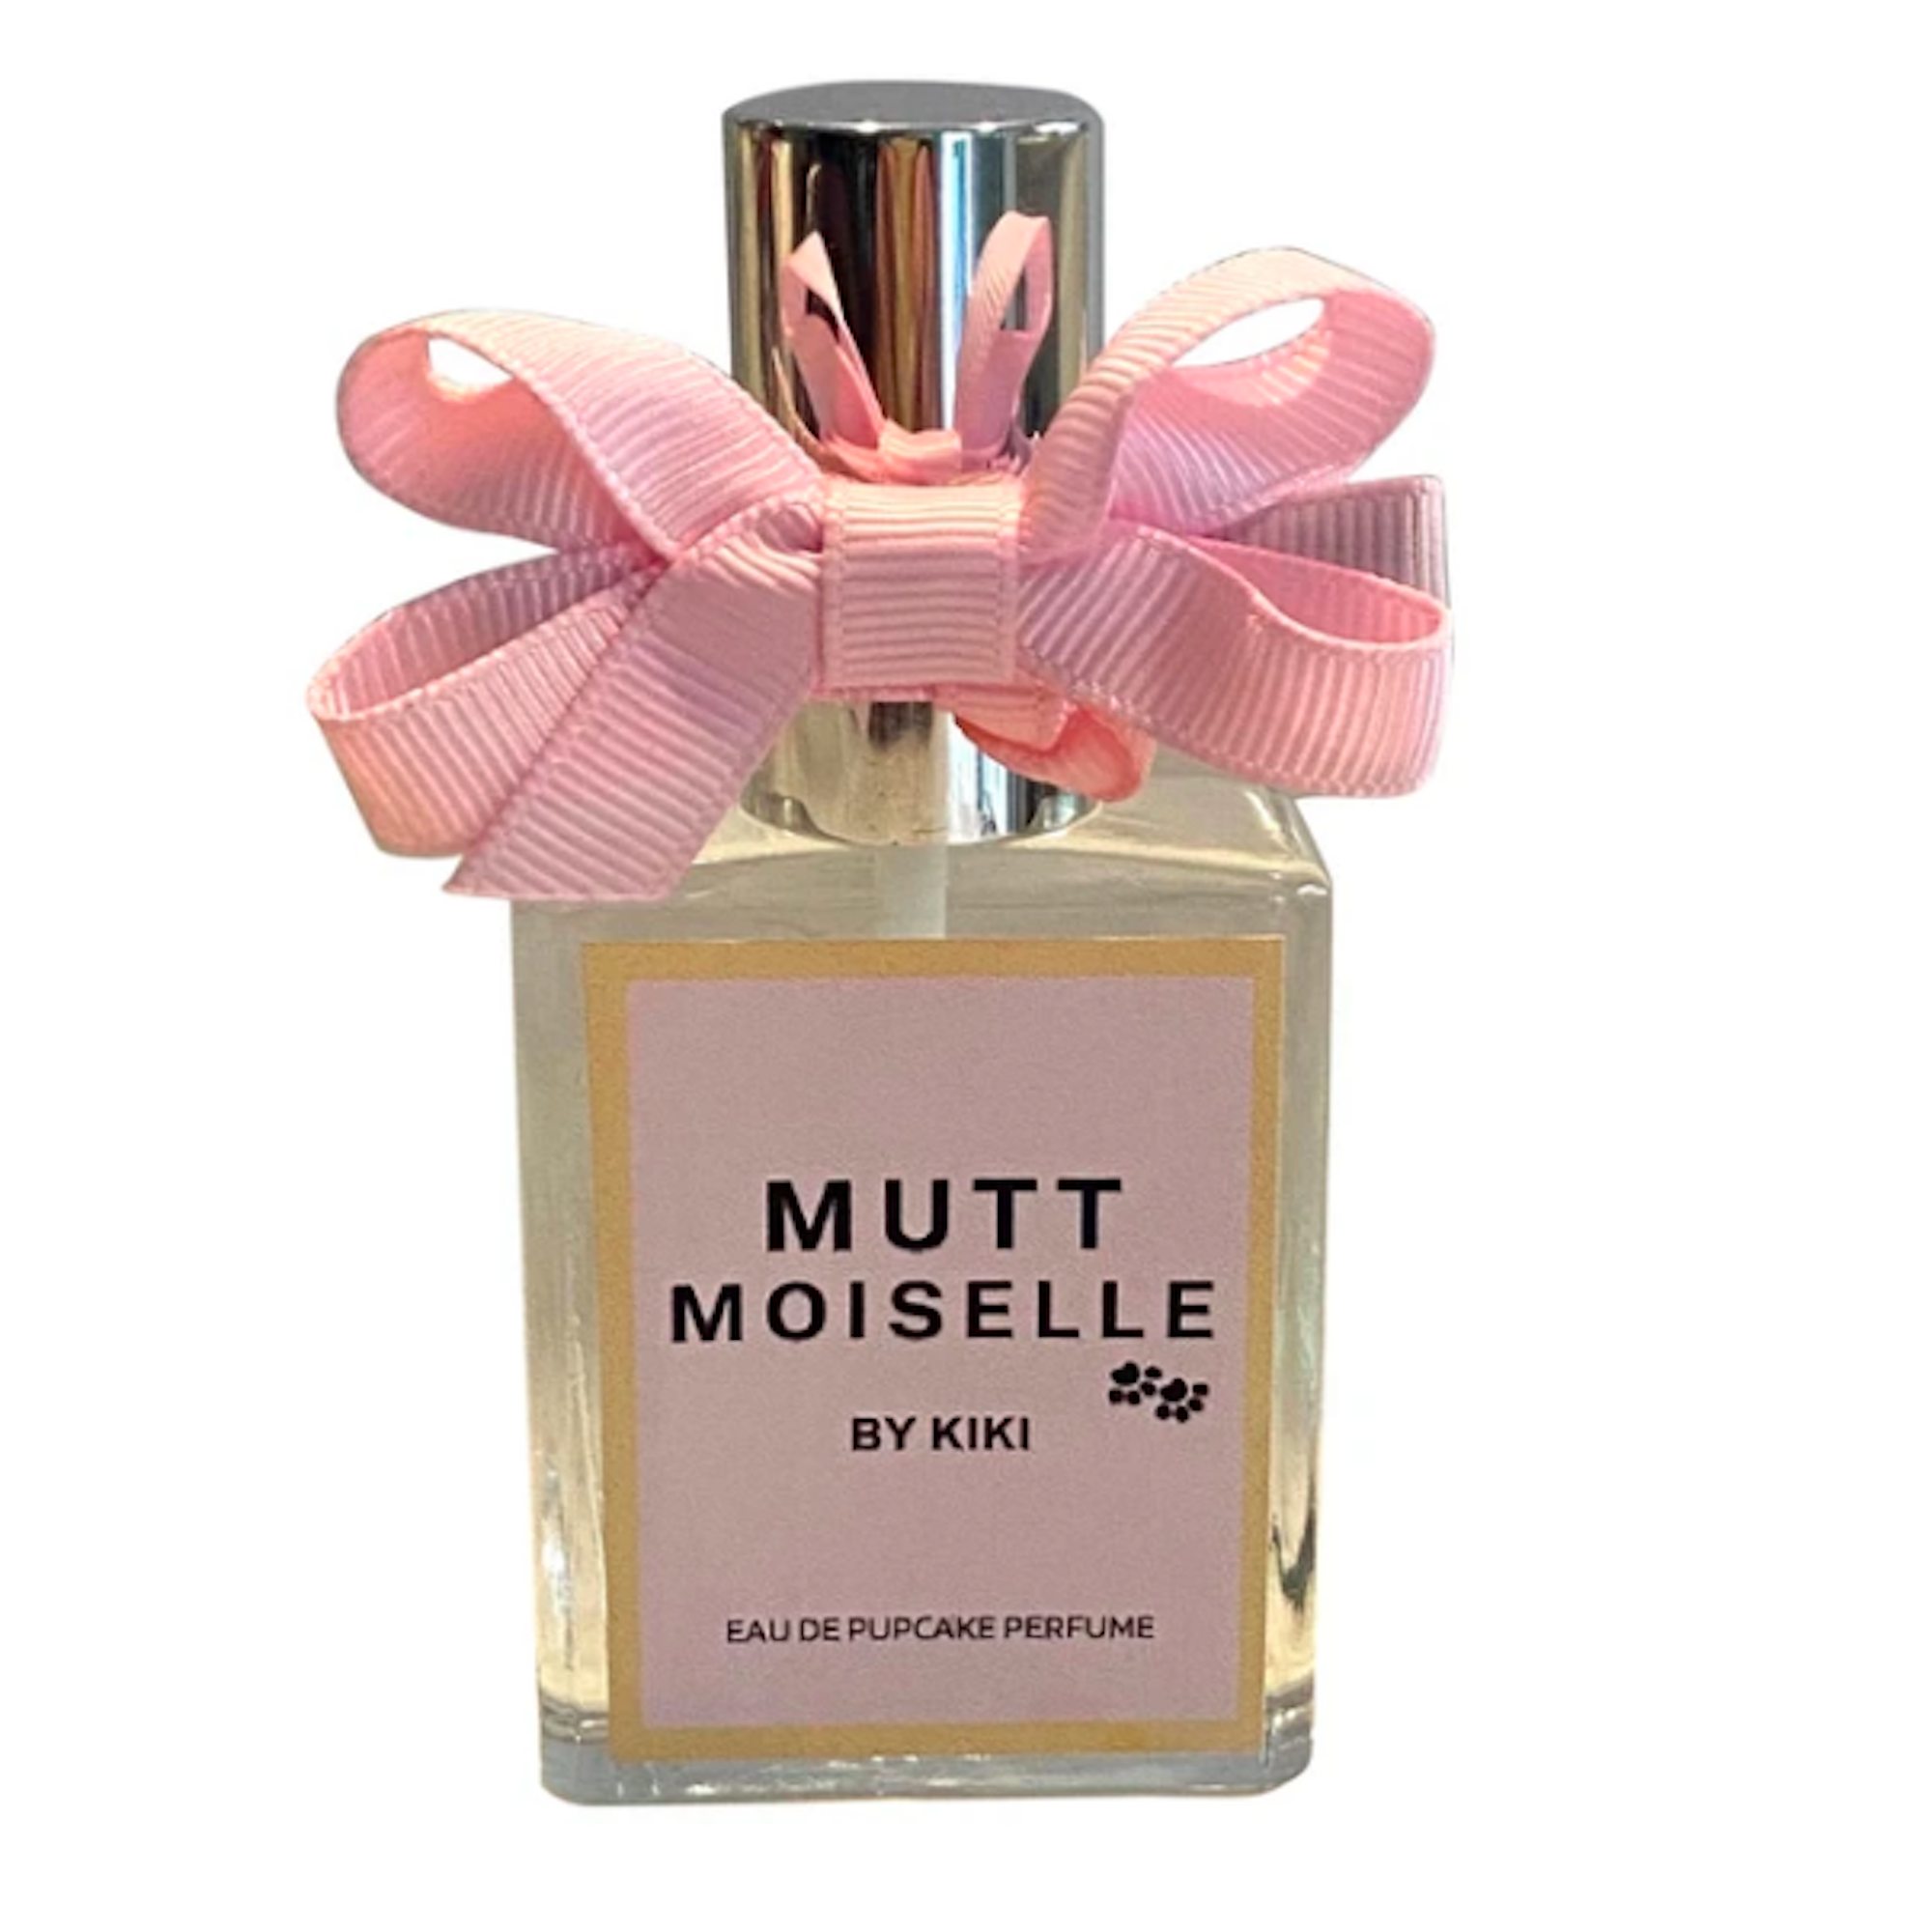 The Dog Squad Pupcake Perfume for Dogs - Mutt Moiselle by Kiki